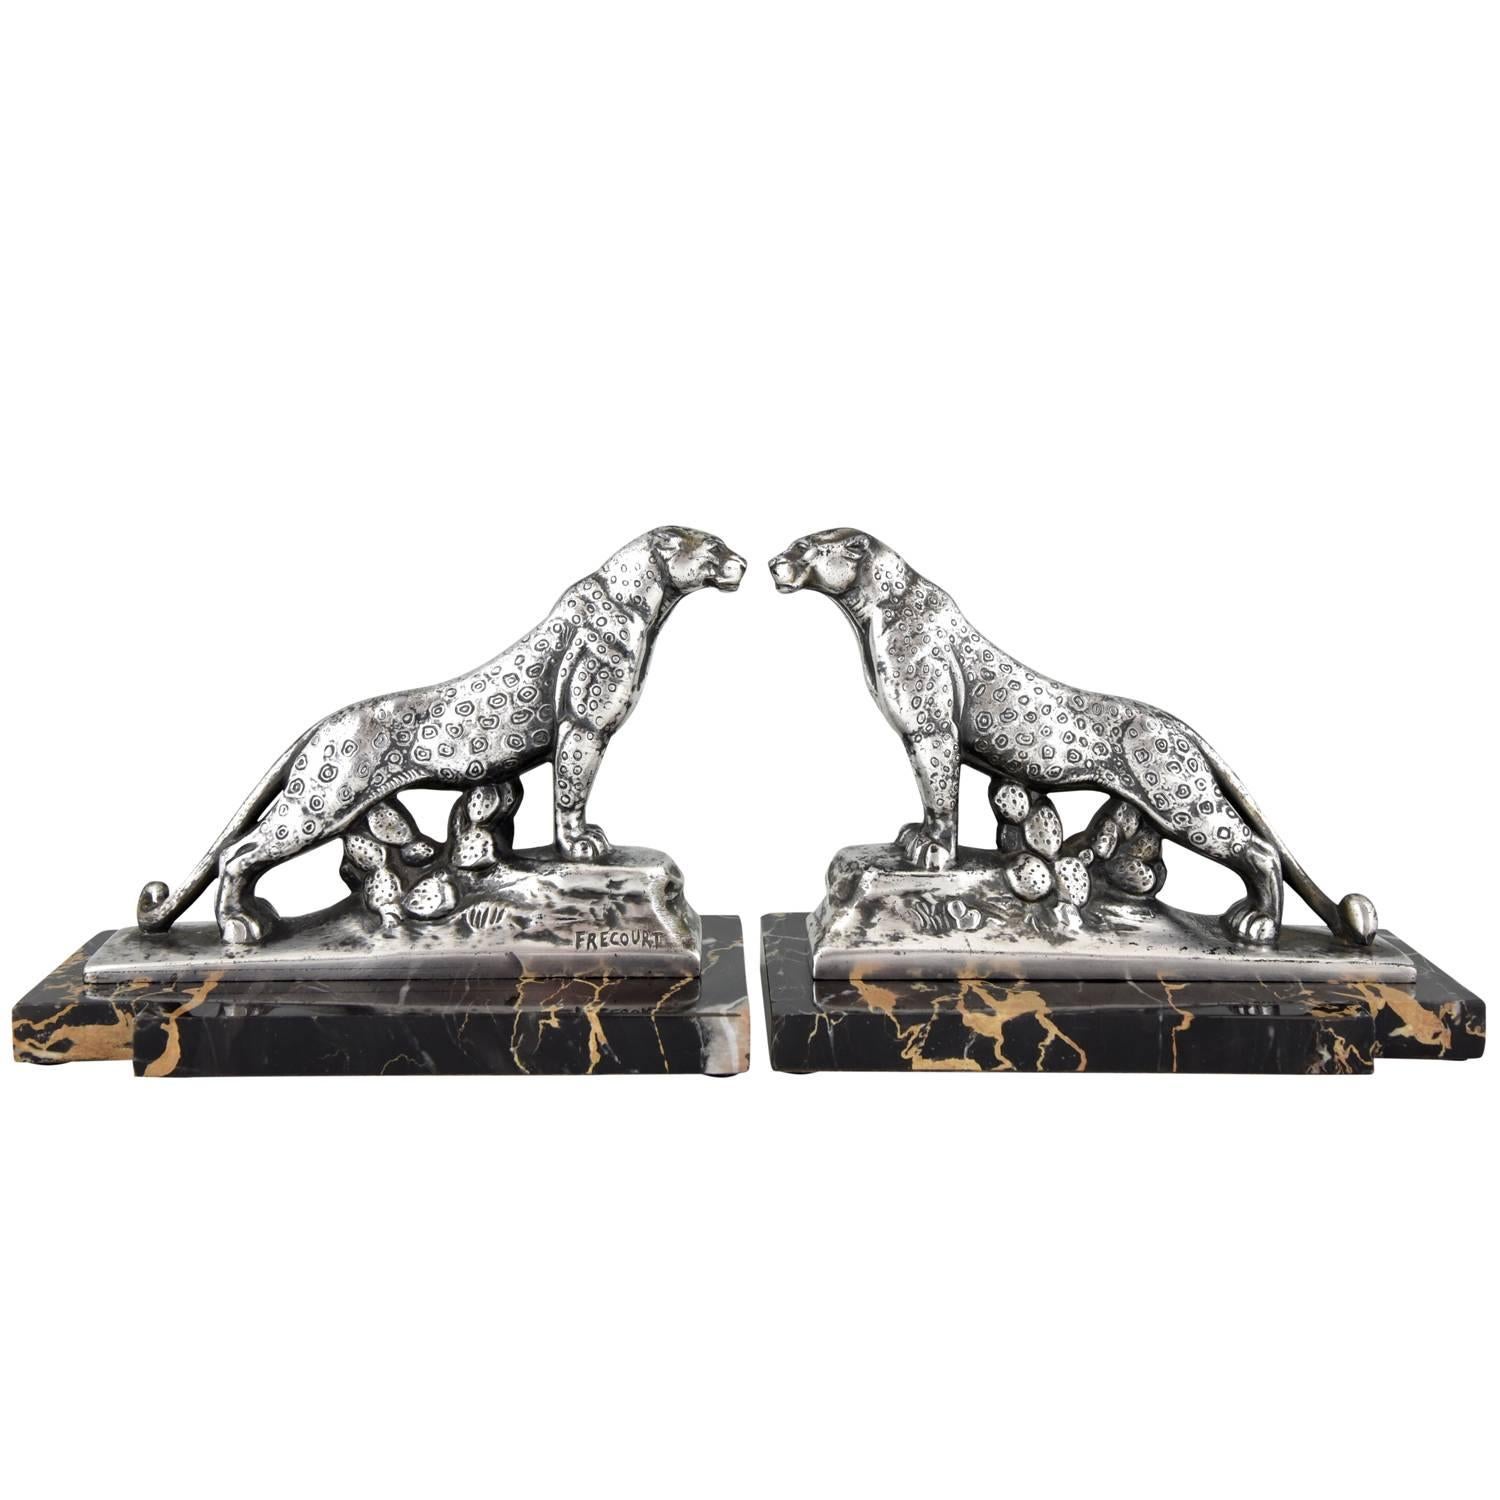 French Art Deco Panther Leopard Bookends by Maurice Frecourt, 1930